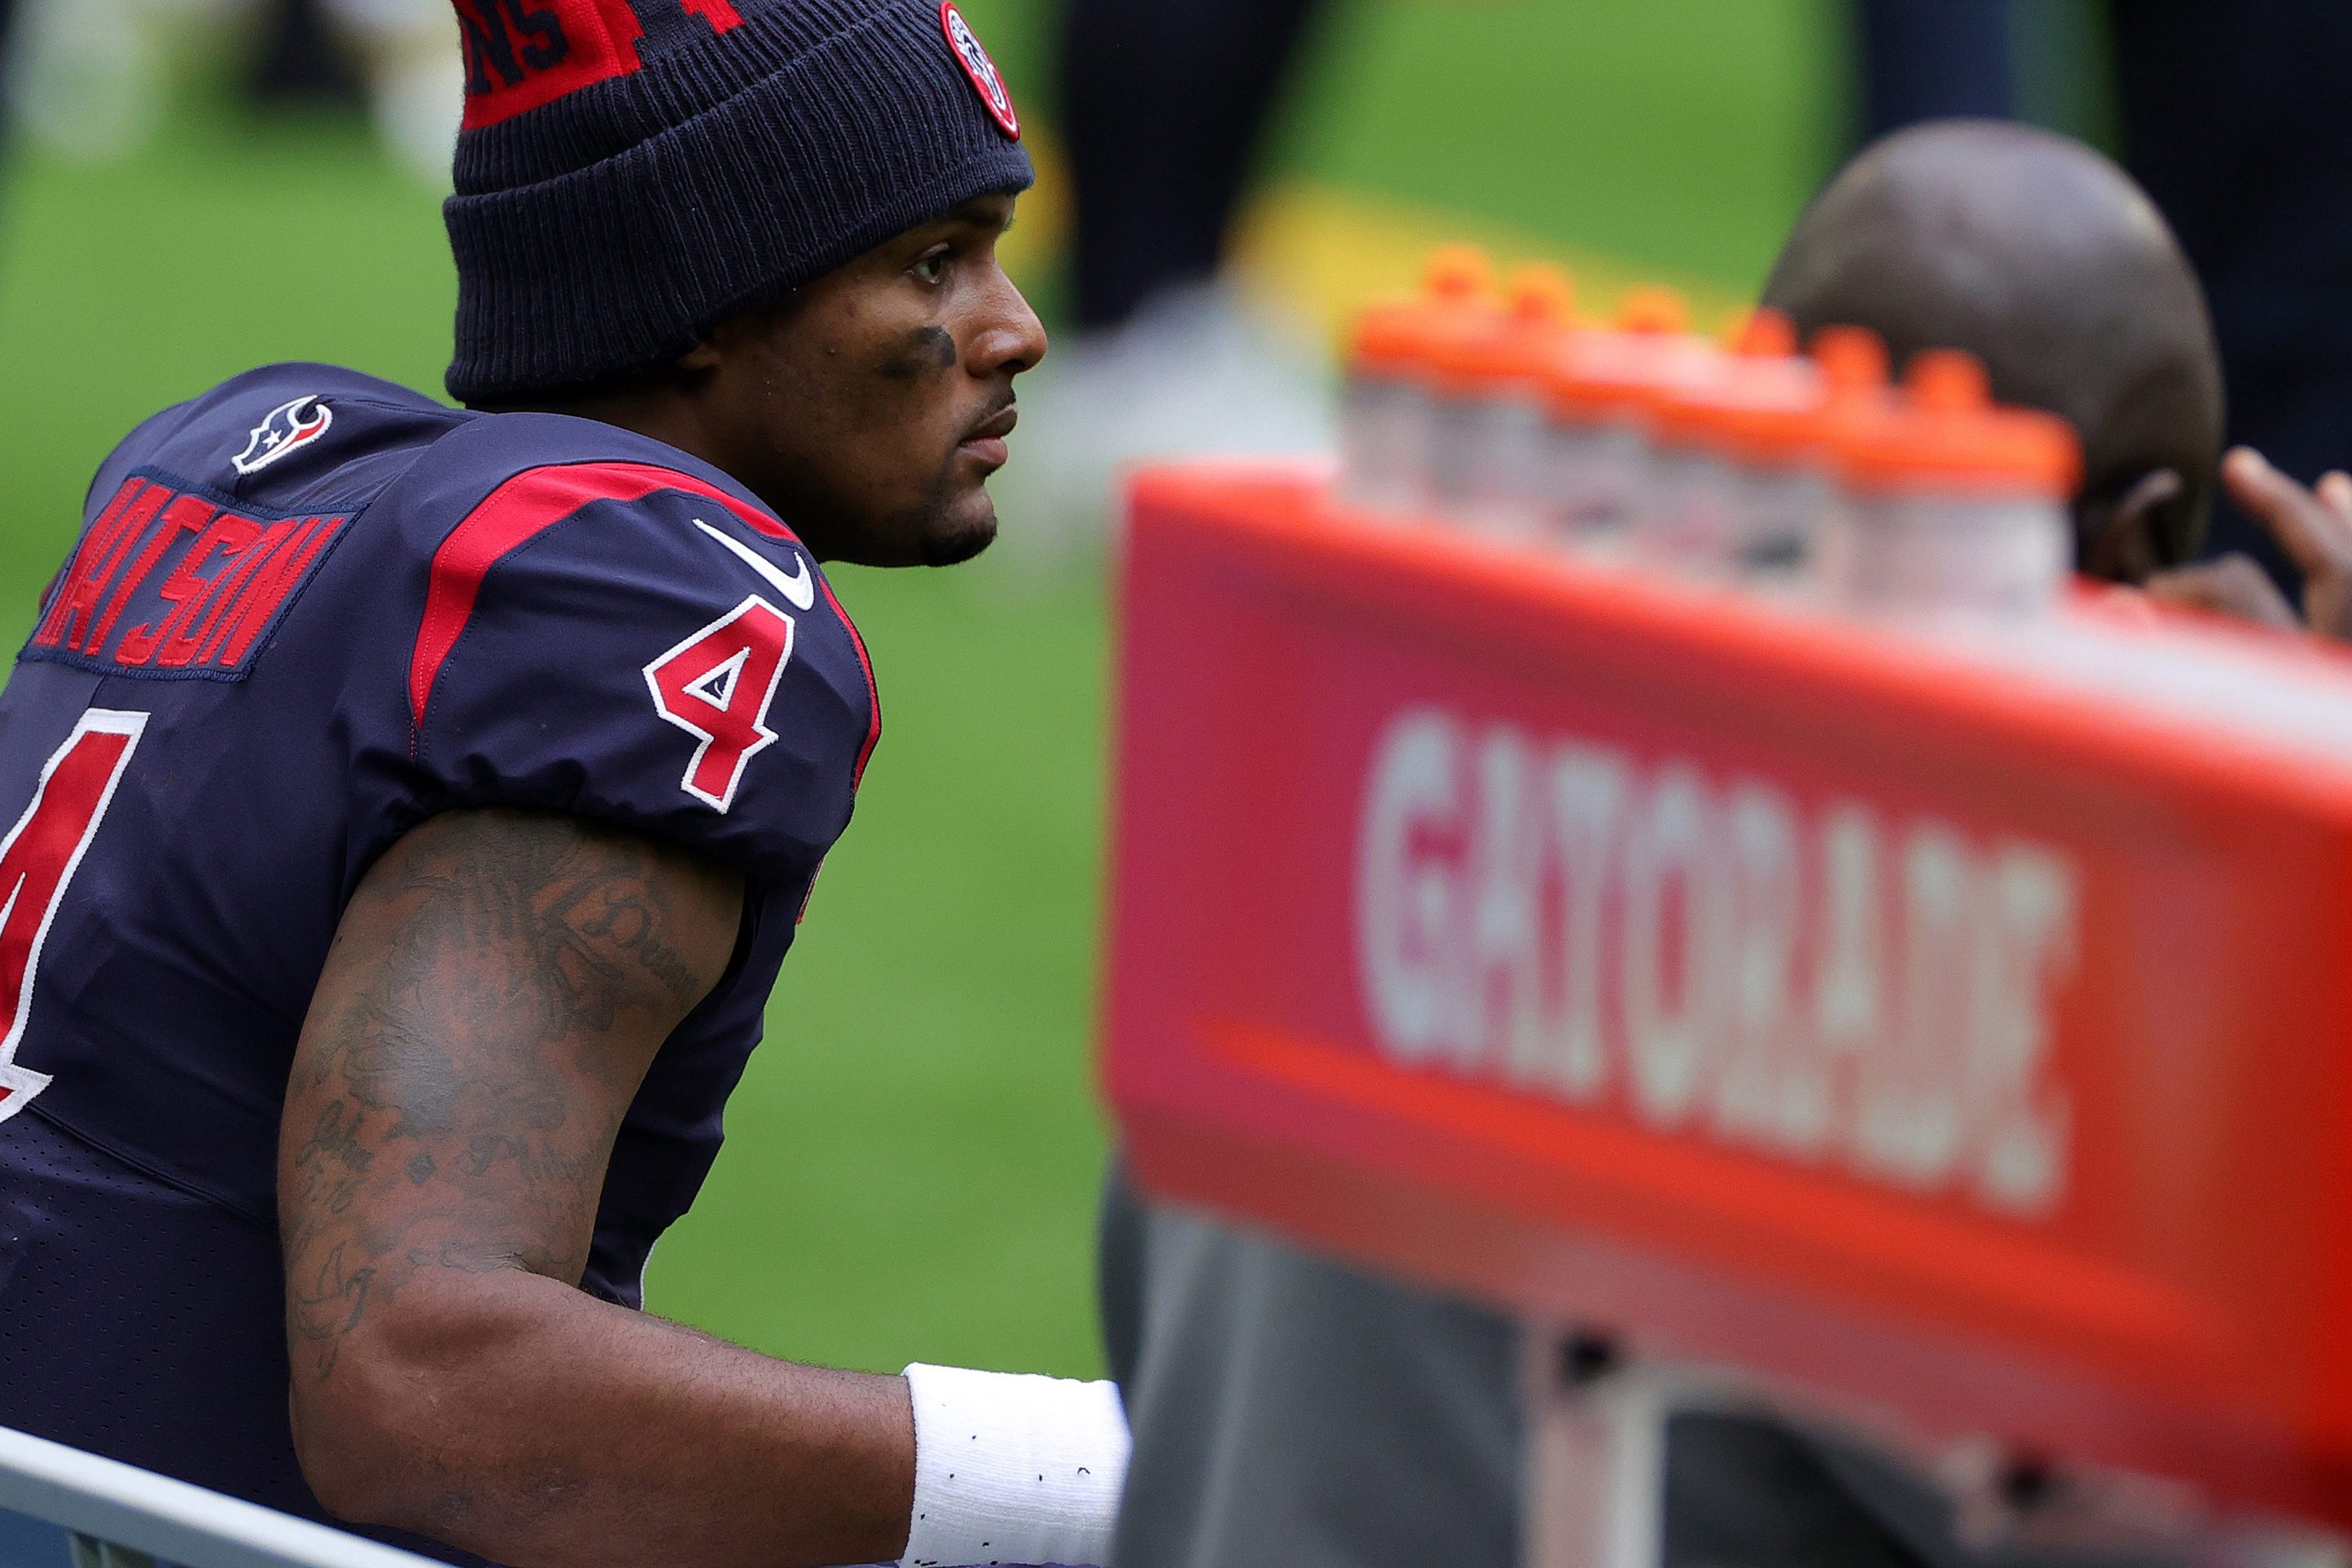 Quarterback Deshaun Watson of the Houston Texans looks on from the bench late in the fourth quarter of the game against the Cincinnati Bengals at NRG Stadium on December 27, 2020 in Houston, Texas.